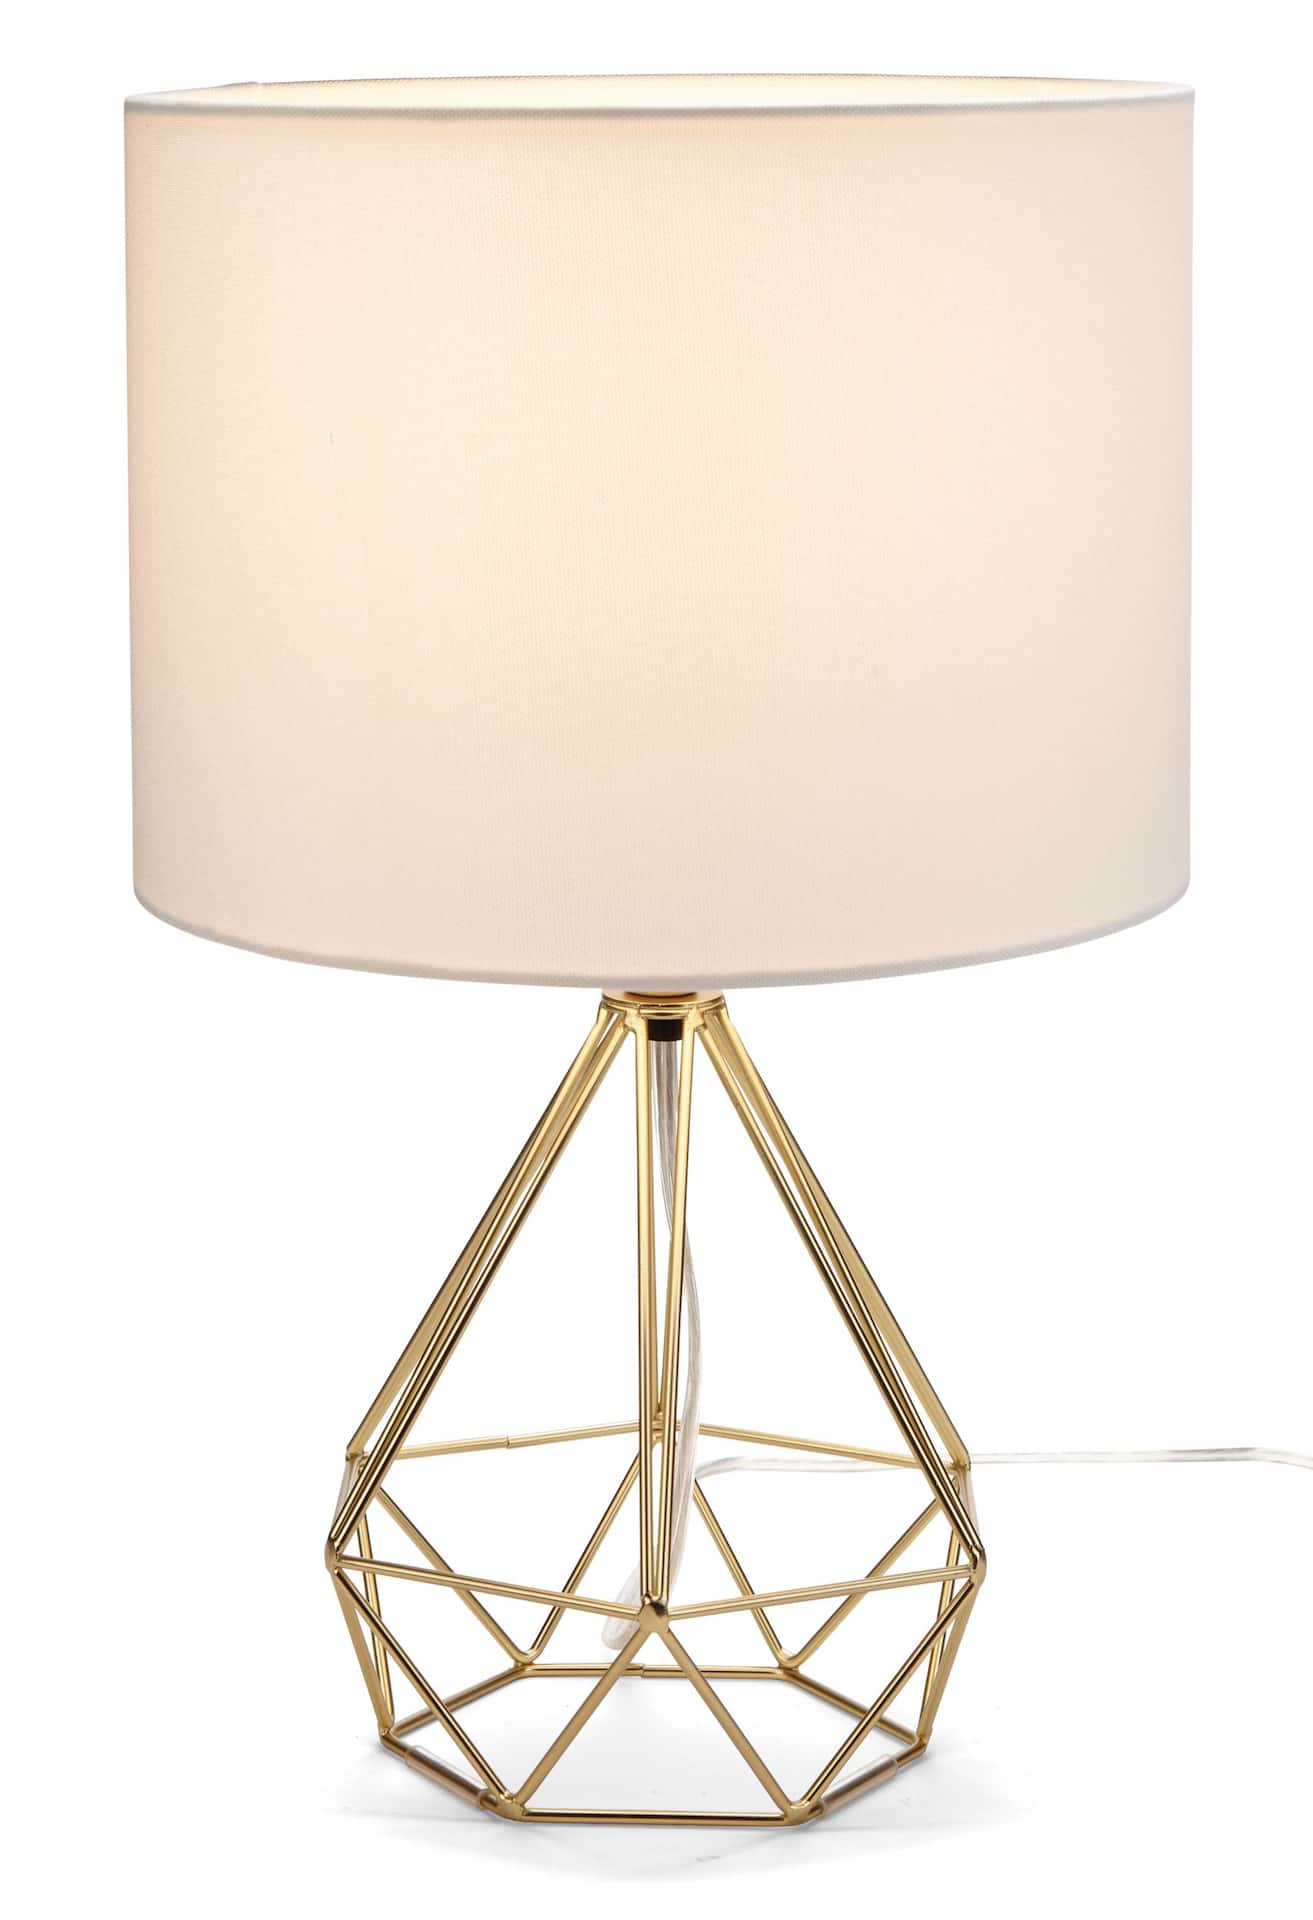 Desk Table Lamp with Black Fabric Shade Gold Base for Home and Office Use